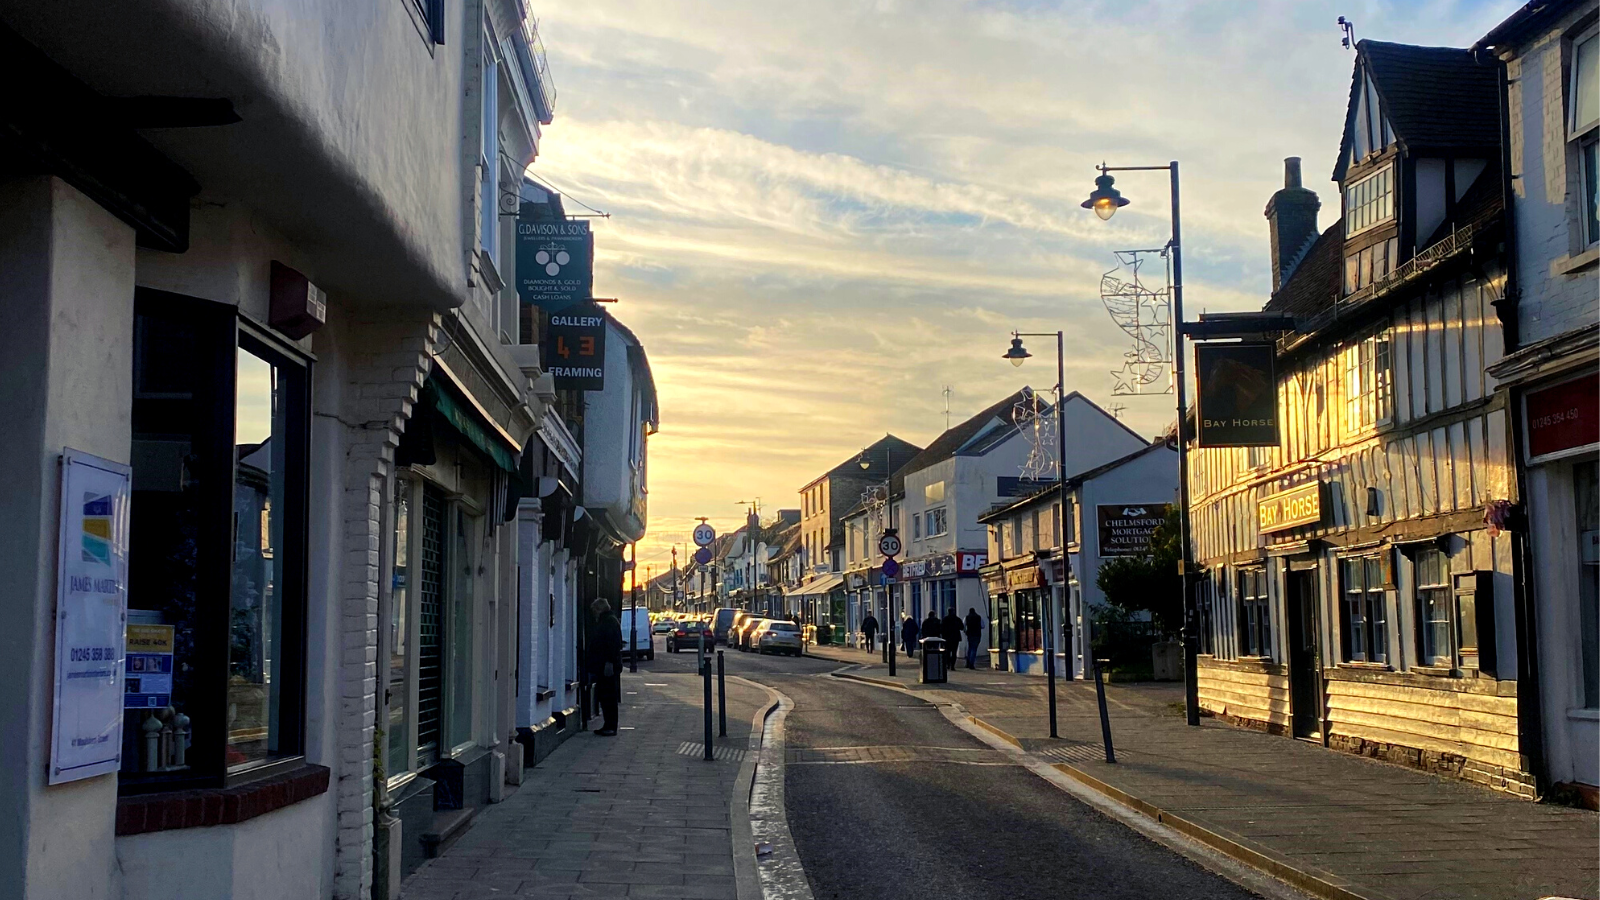 Moulsham Street Hosts Many Independent Shops, Bars And Restaurants, As Well As Chelmsford College Campus, Day Nurseries, And Many Homes